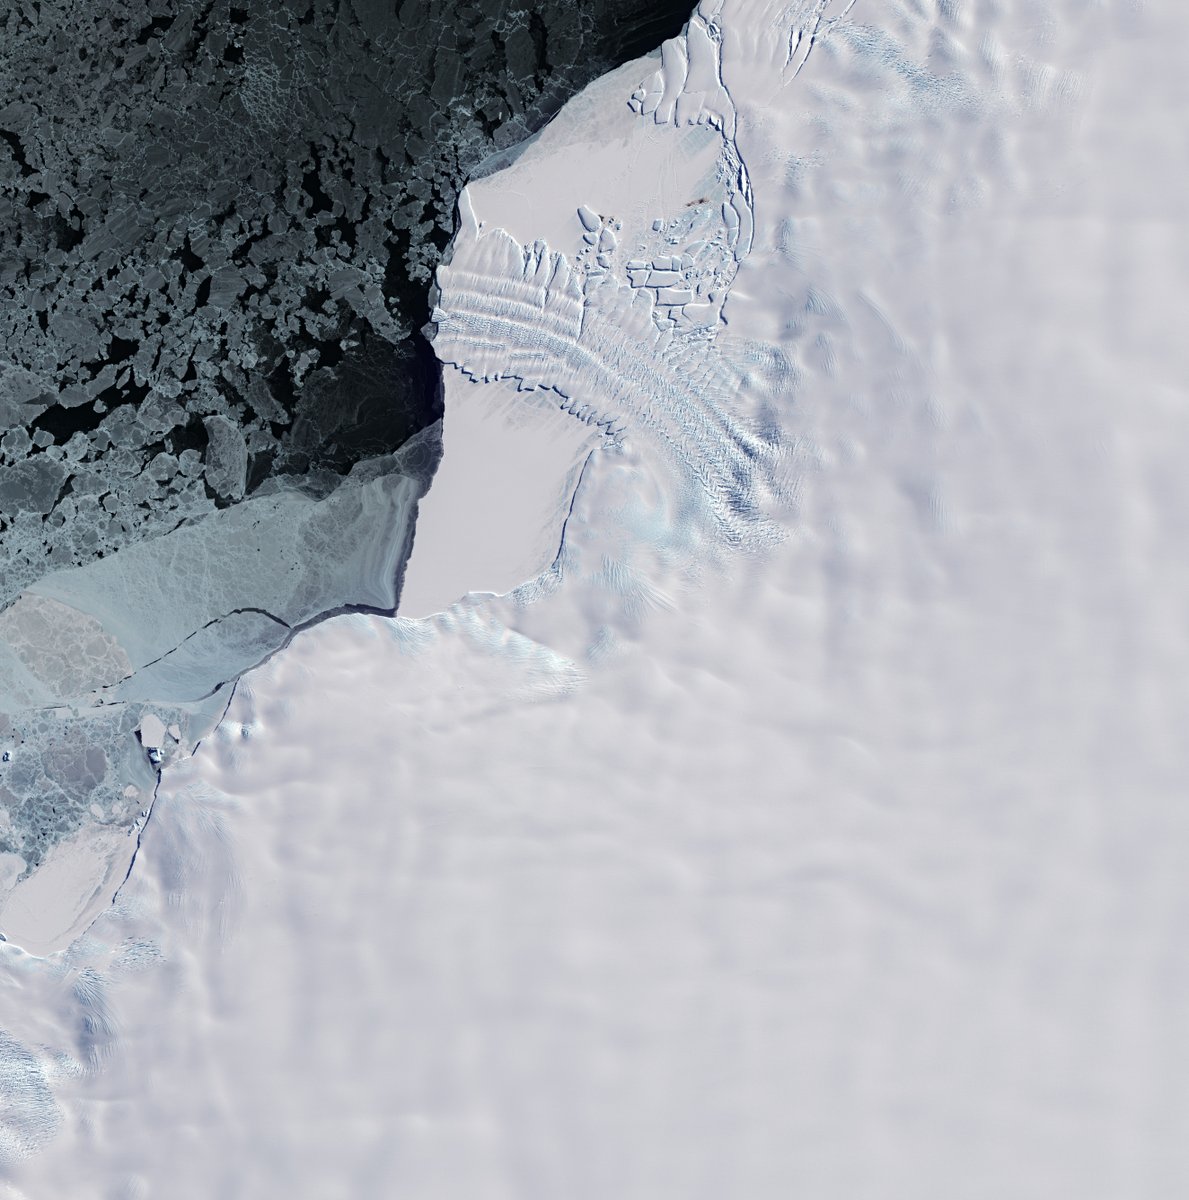 📷 This week's Earth from space features the ice tongue of the Dawson-Lambton Glacier in Antarctica.

The @CopernicusEU #Sentinel2 image features patterns on and around the glacier which depict crevasses and rumples, resulting from pressure as the glacier slides towards the sea.